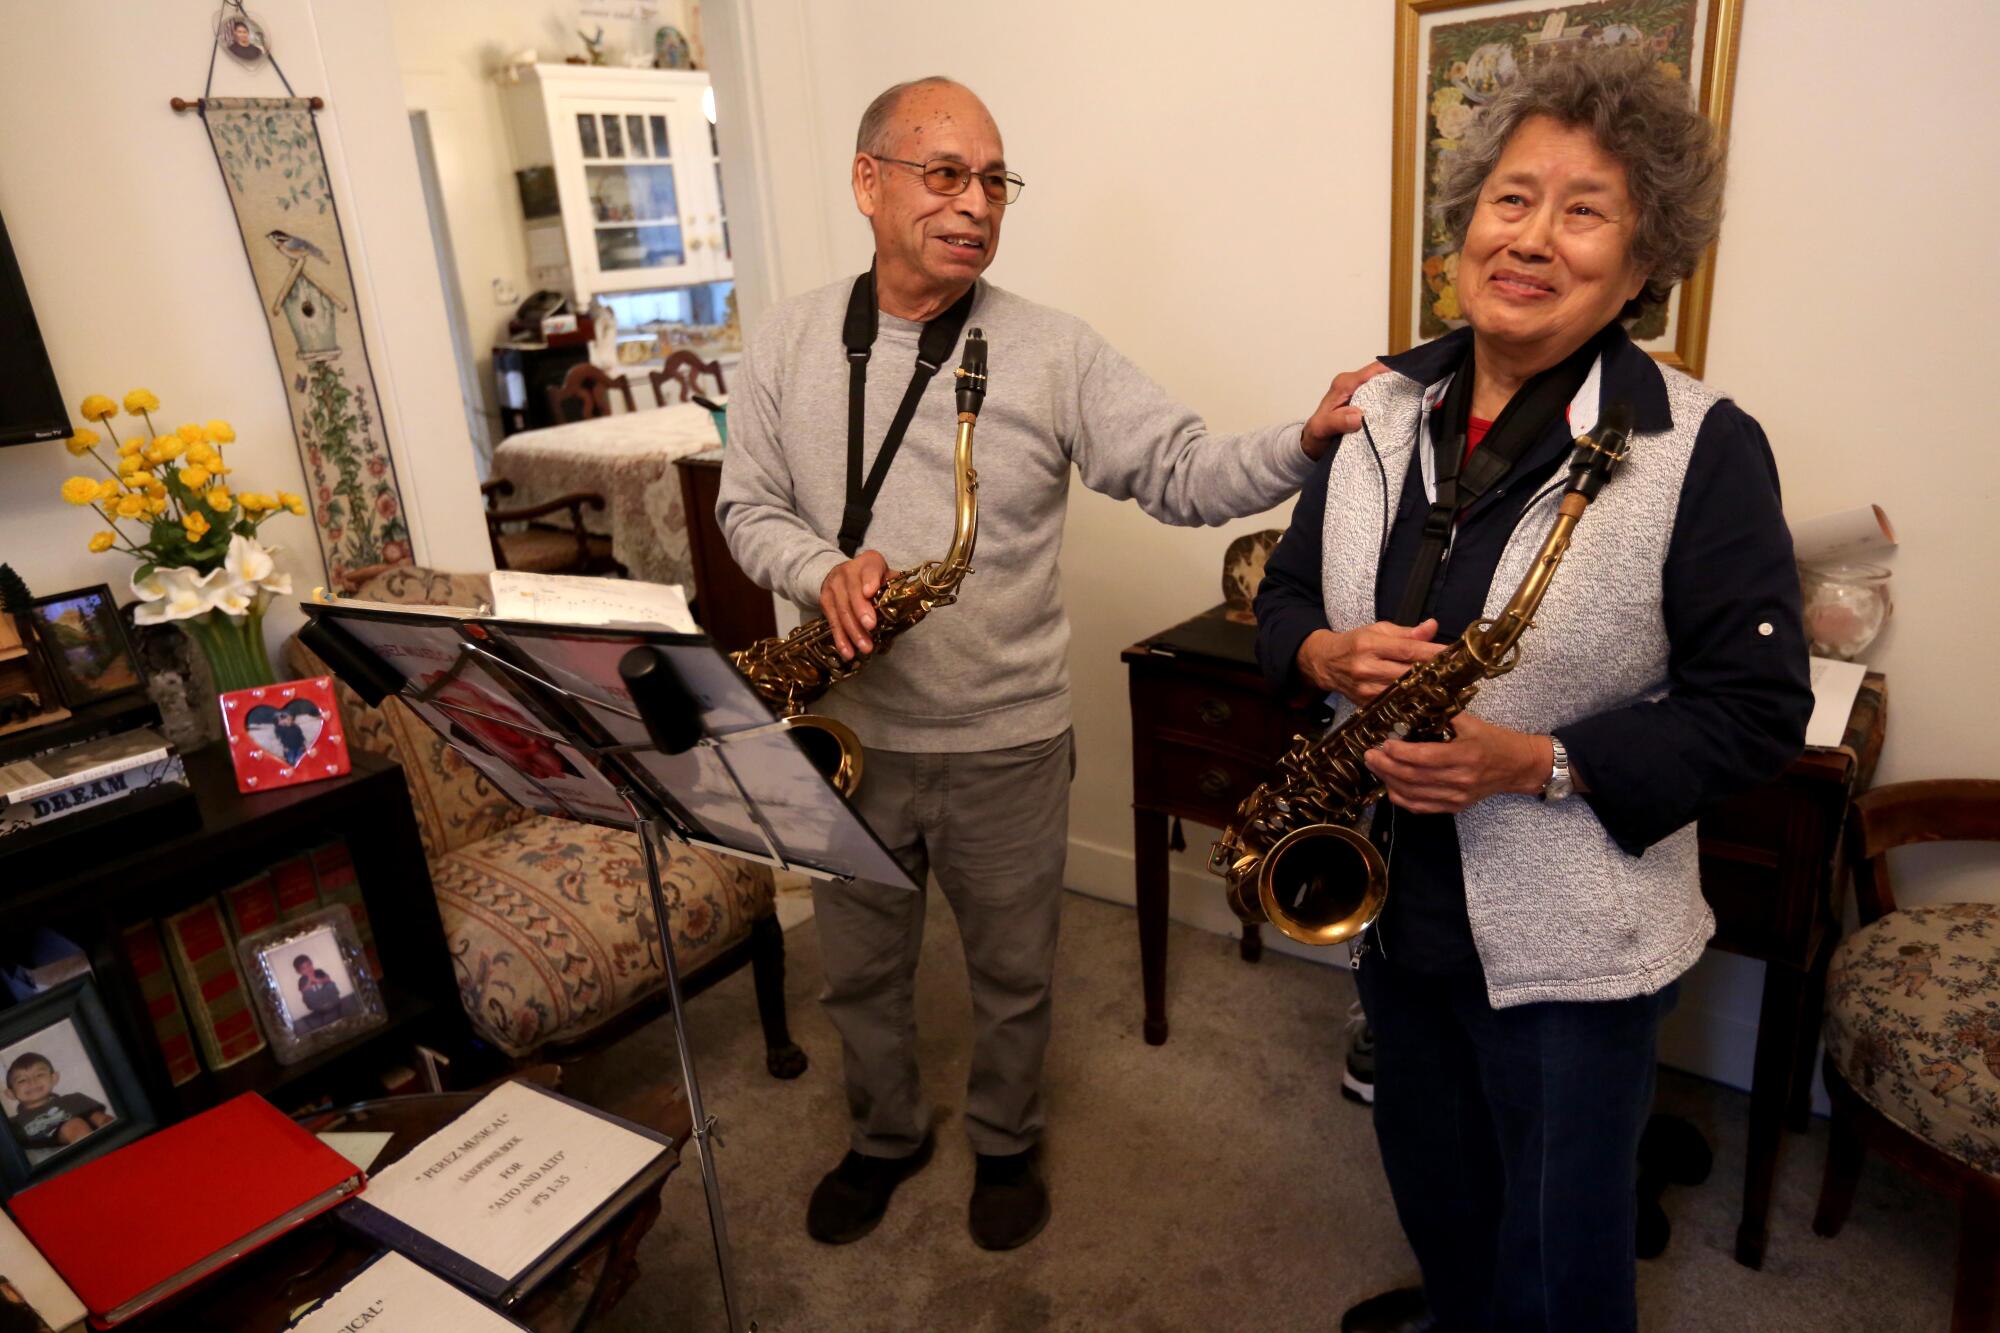 Danny Perez and his wife, Martha Perez, take a break from playing religious songs on their saxophones.